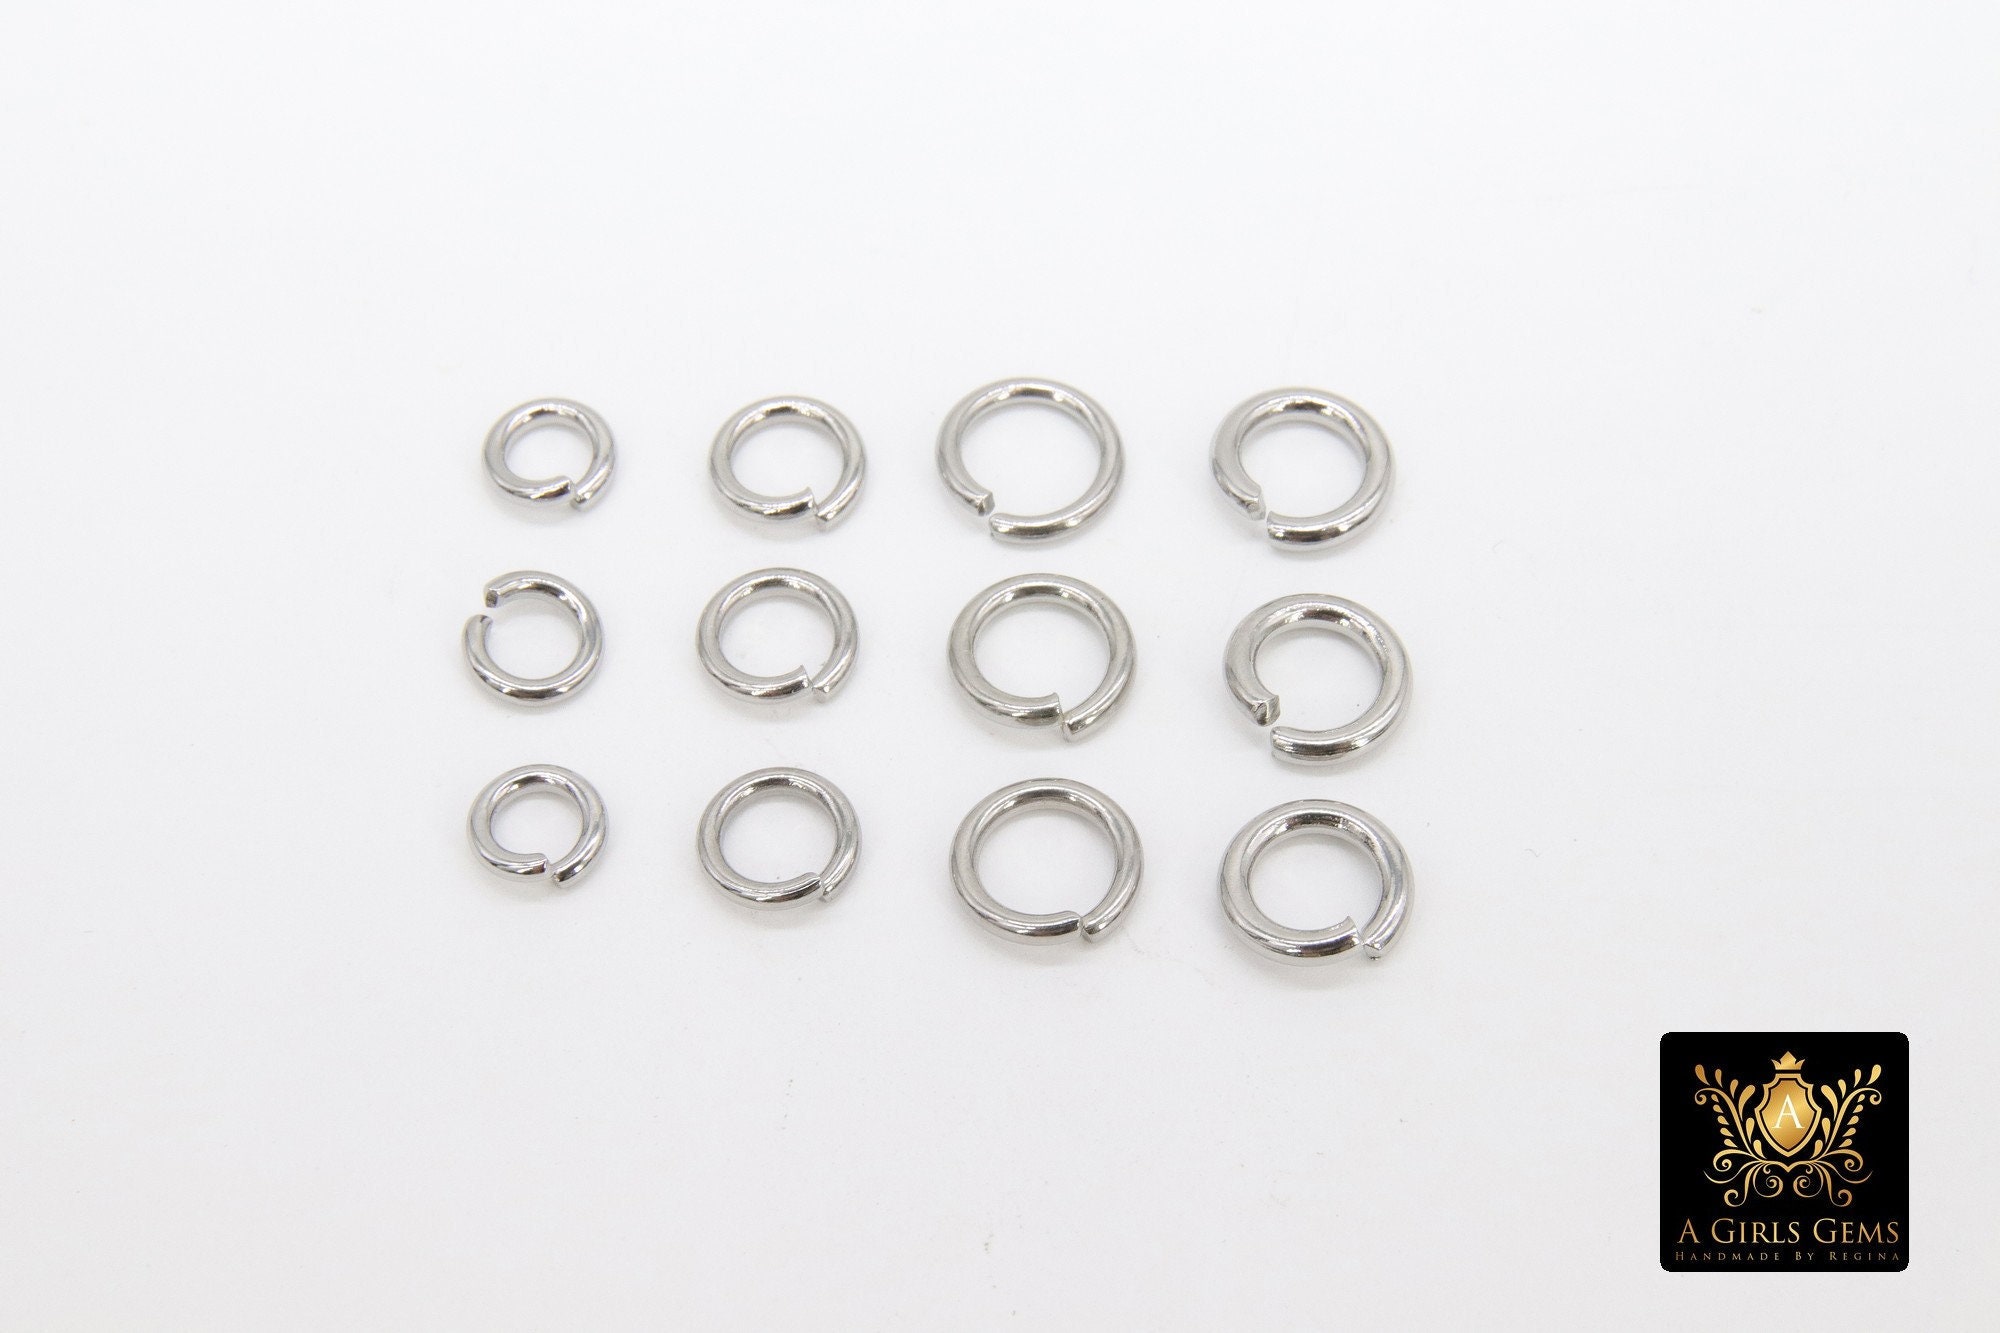 Stainless Steel Silver Jump Rings, Open Snap Close Rings 2384, 6